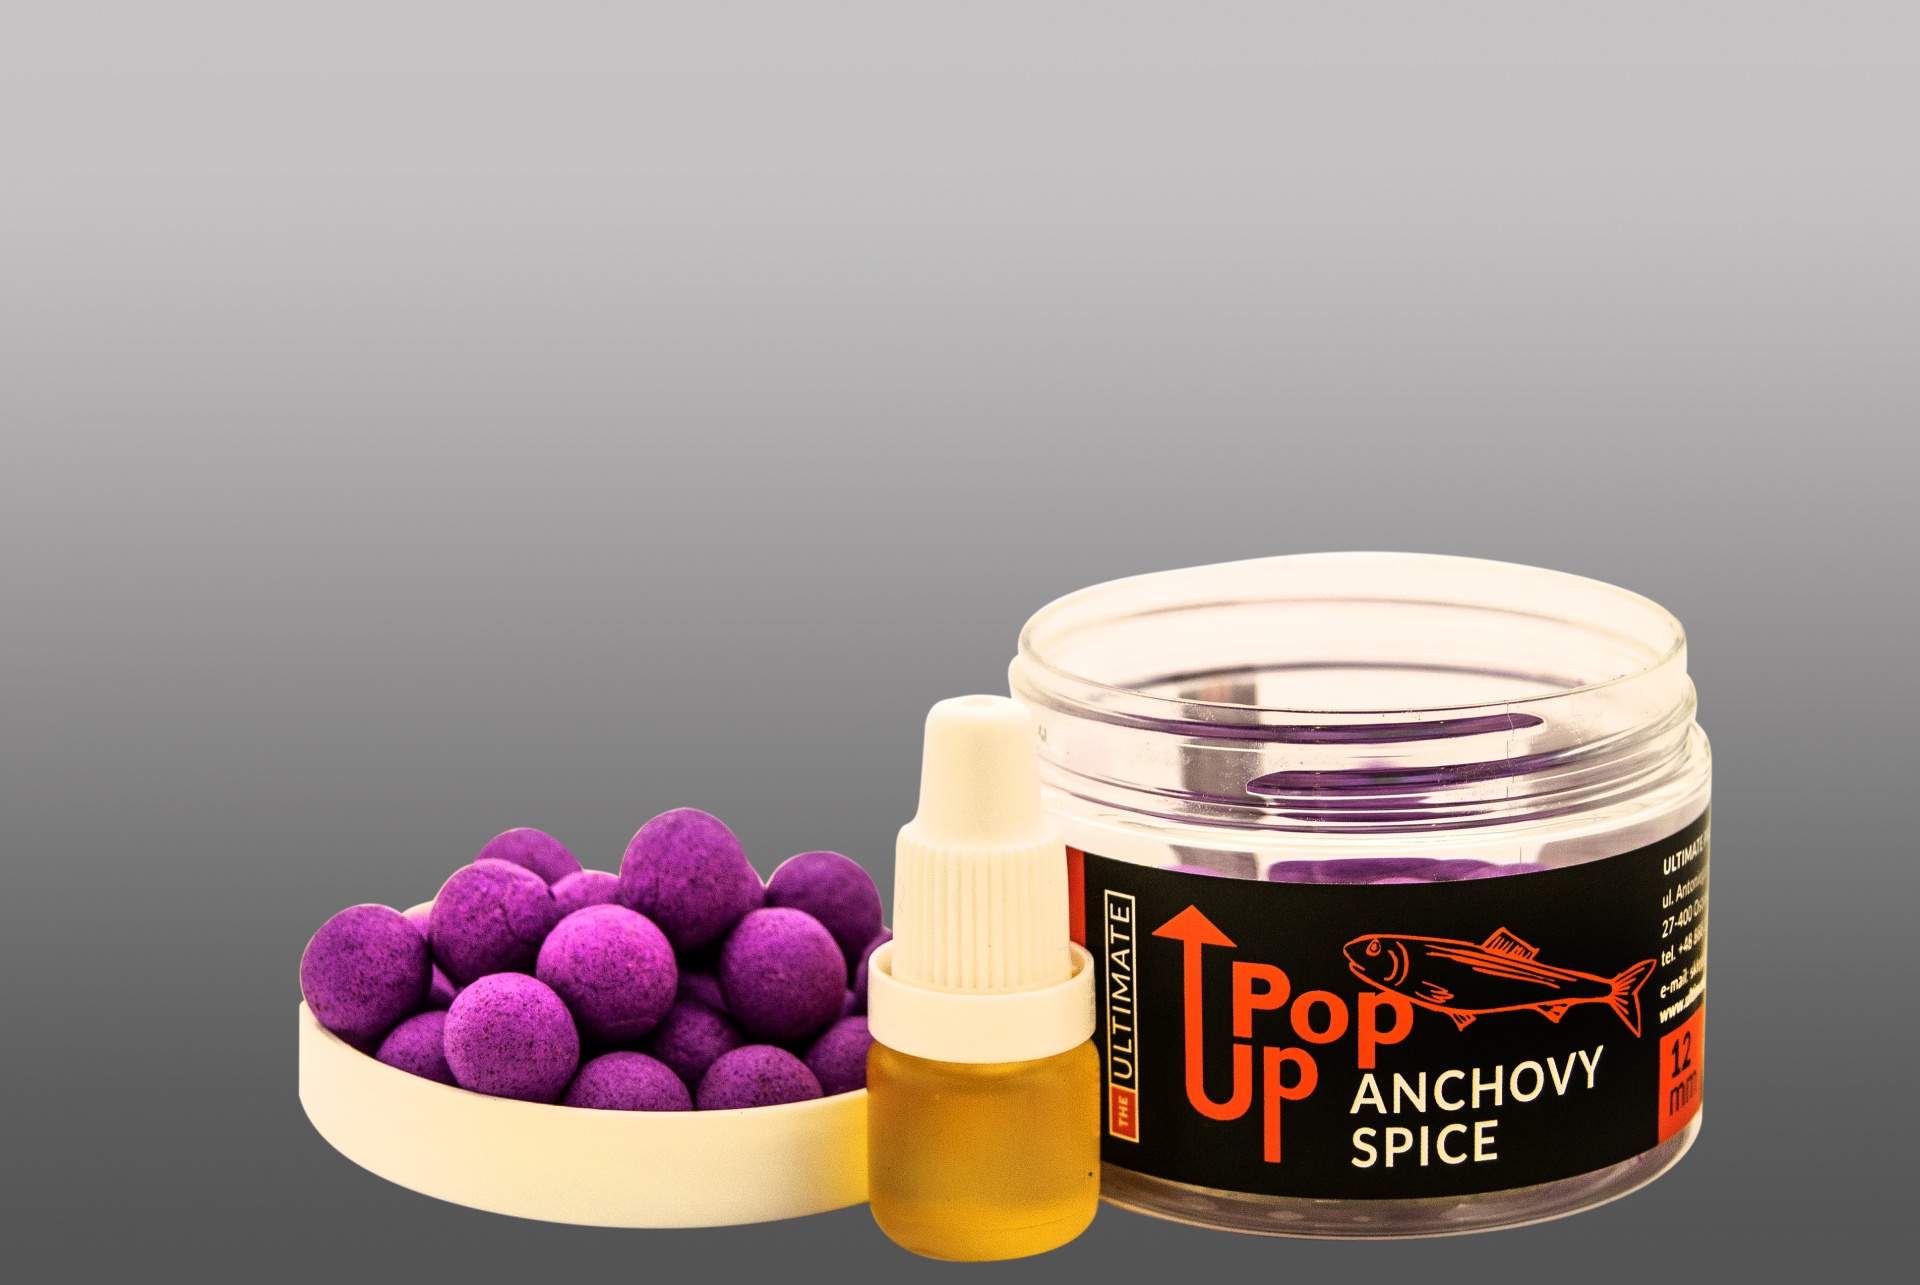 NEW UltimateProducts Anchovy Spice Pop-Ups